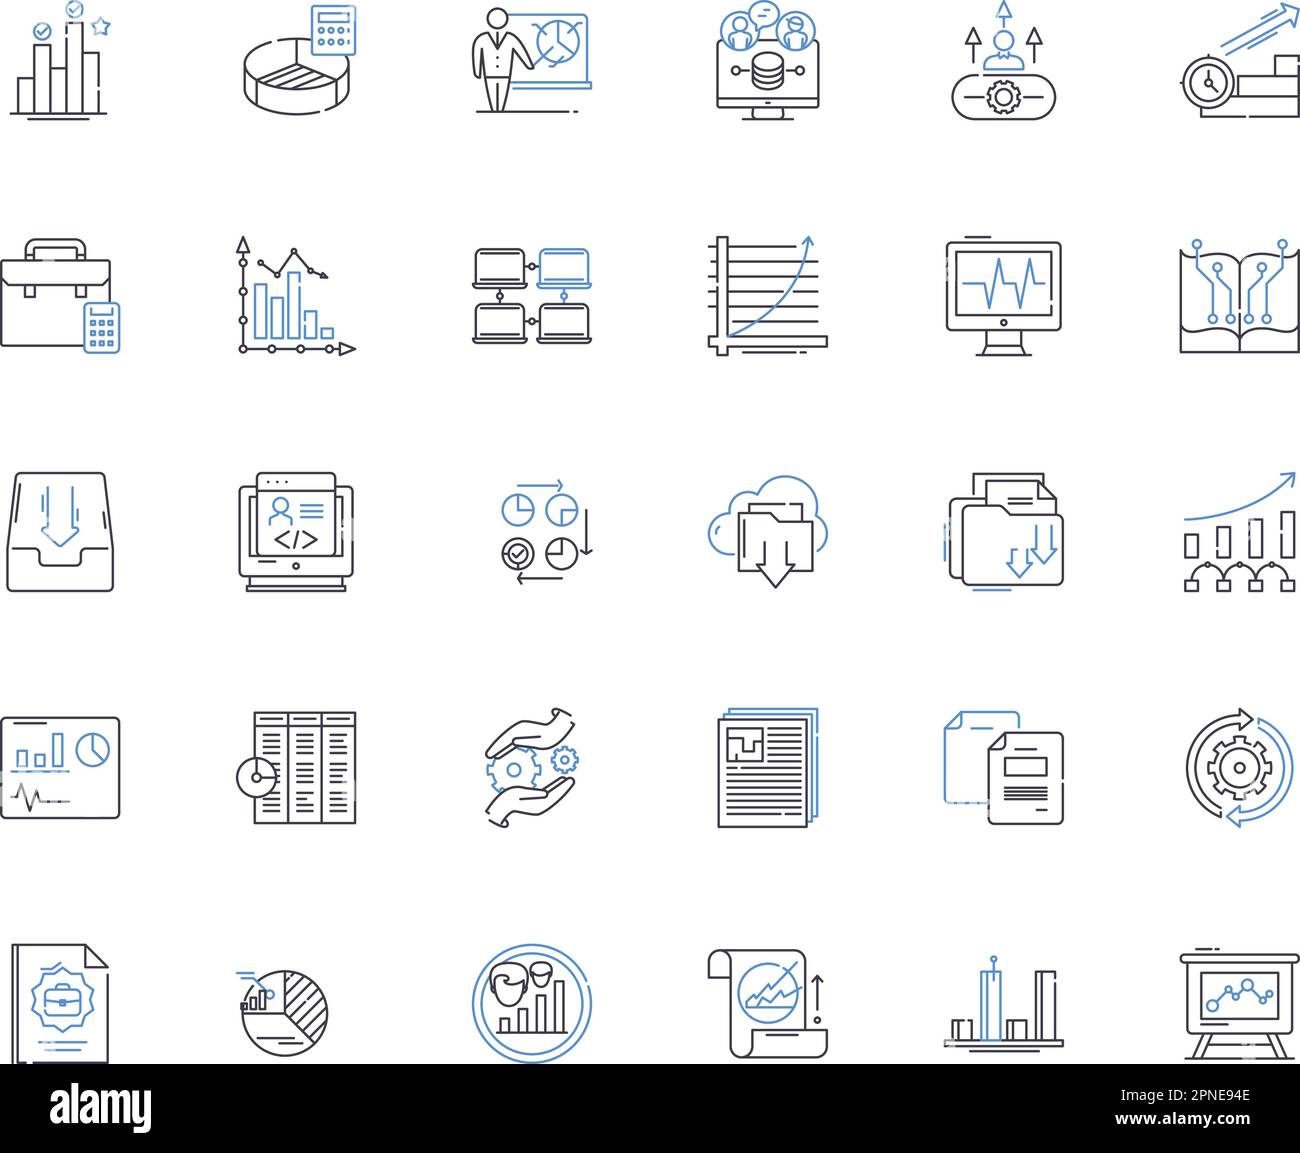 Figures line icons collection. Statistic, Analysis, Diagram, Graph, Chart, Visualization, Infographic vector and linear illustration. Diagrammatic Stock Vector